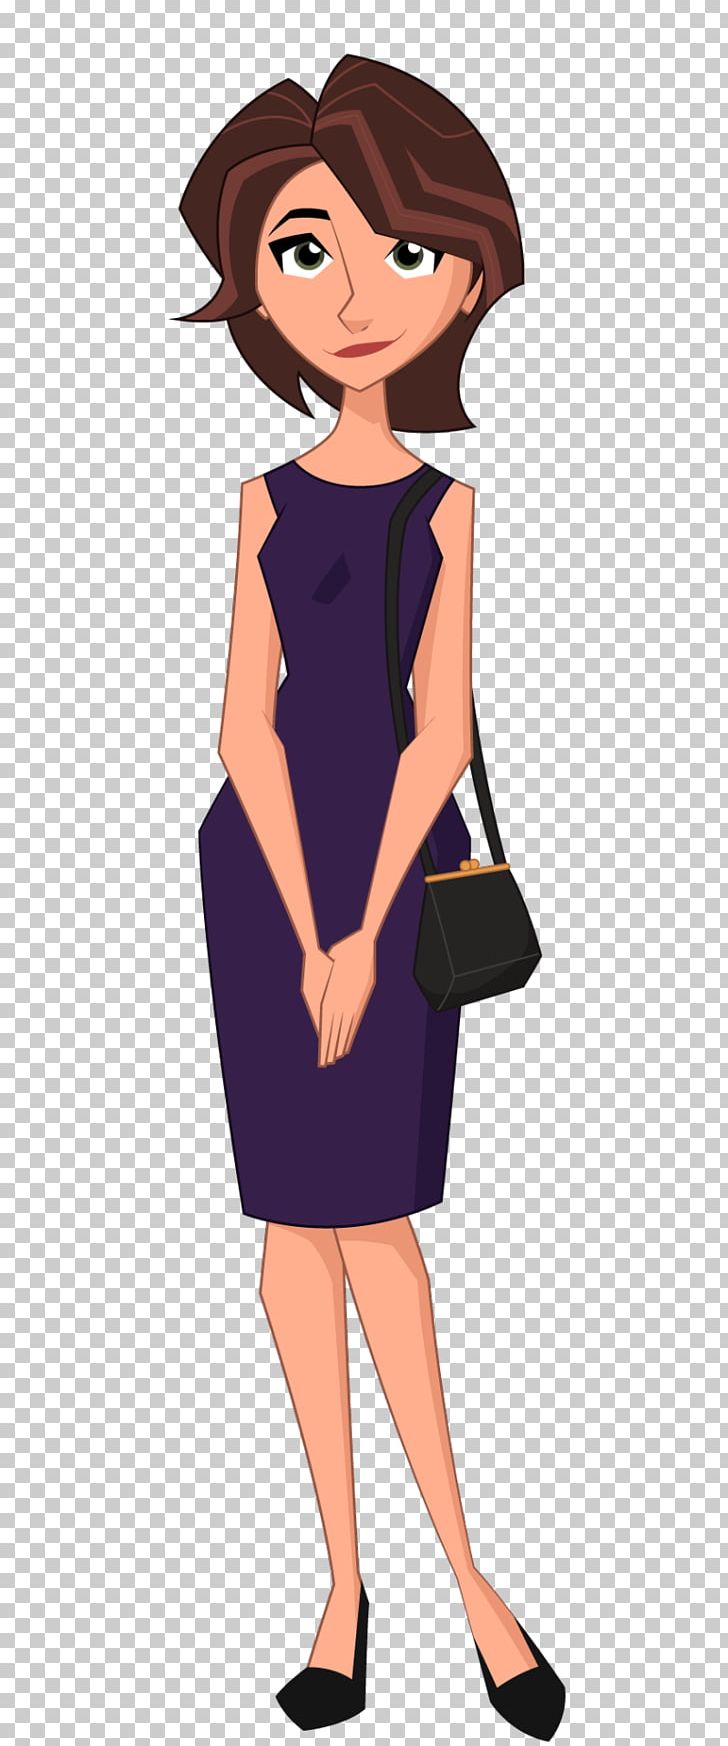 Big Hero 6: The Series Aunt Cass Goes Out Alistair Krei The Dress PNG, Clipart, Alistair Krei, Arm, Art, Big, Big Hero 6 The Series Free PNG Download